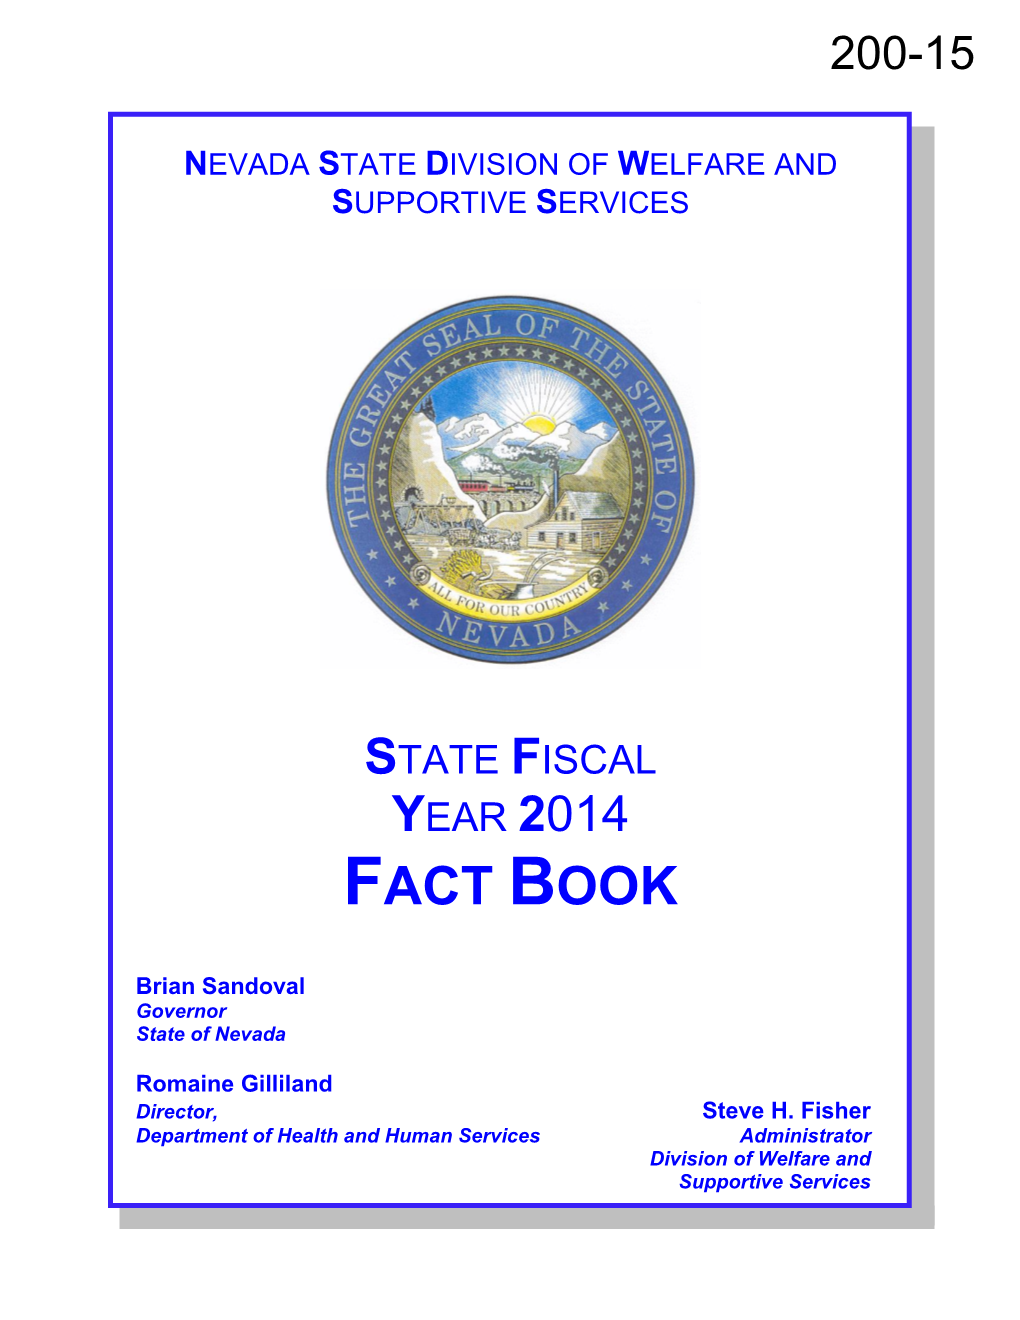 200-15: State Fiscal Year 2014 Fact Book